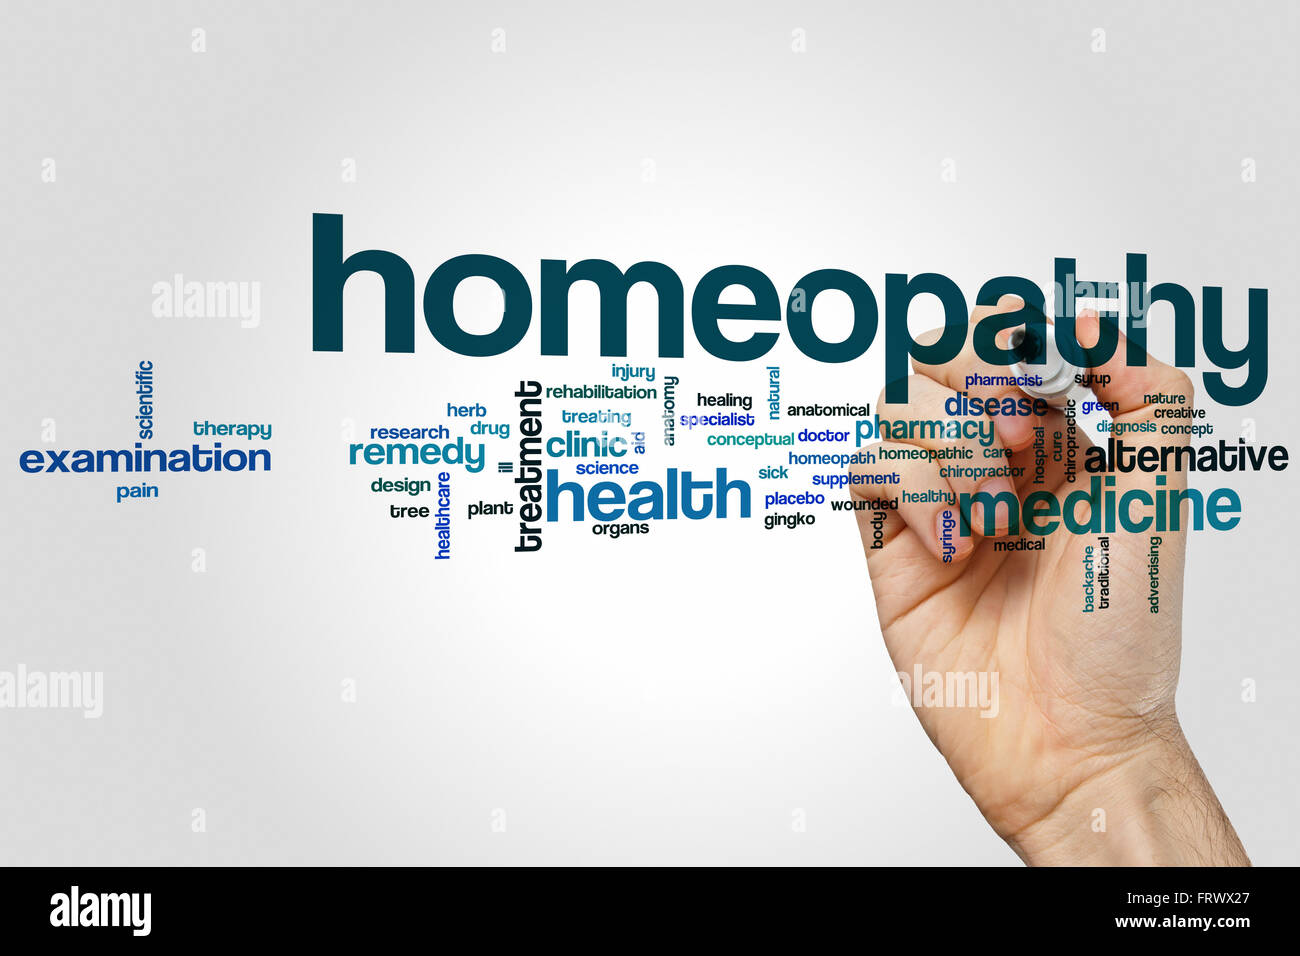 Homeopathy word cloud concept Stock Photo